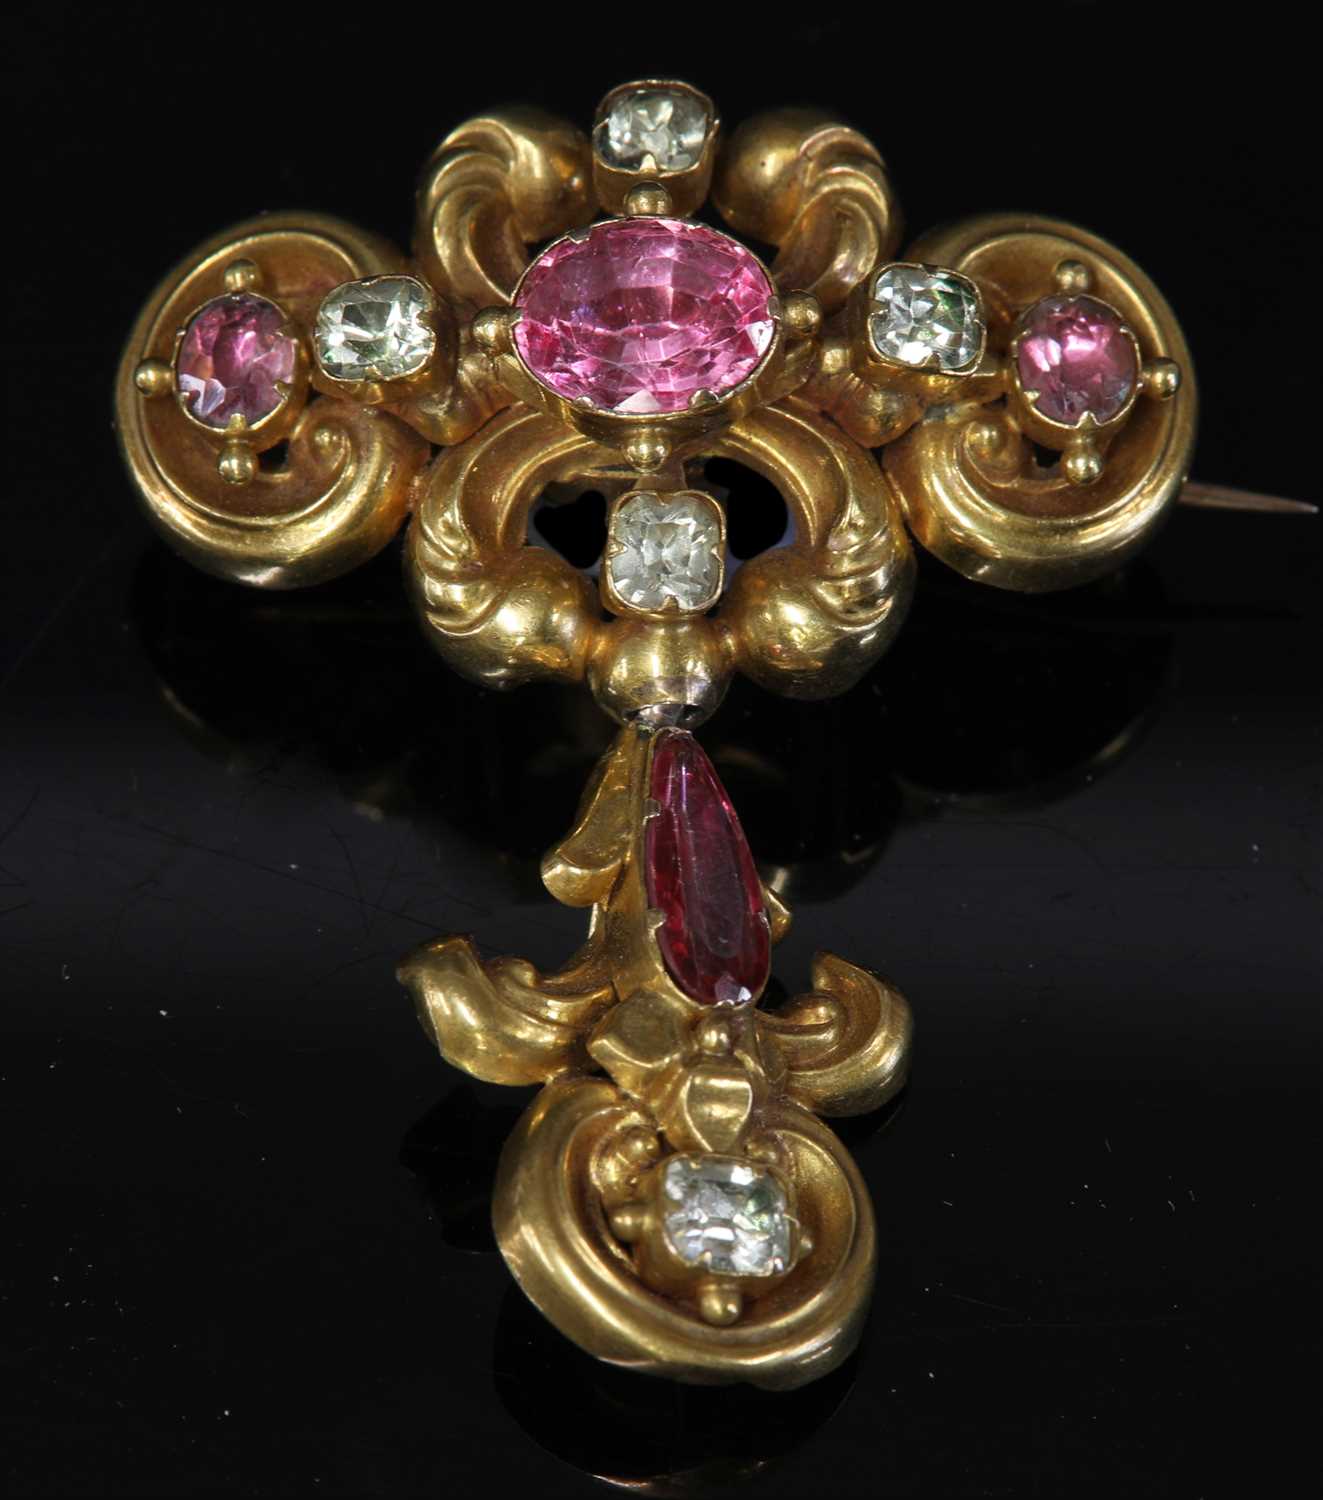 Lot 23 - A Victorian cased gold-foiled topaz and chrysolite brooch, c.1840